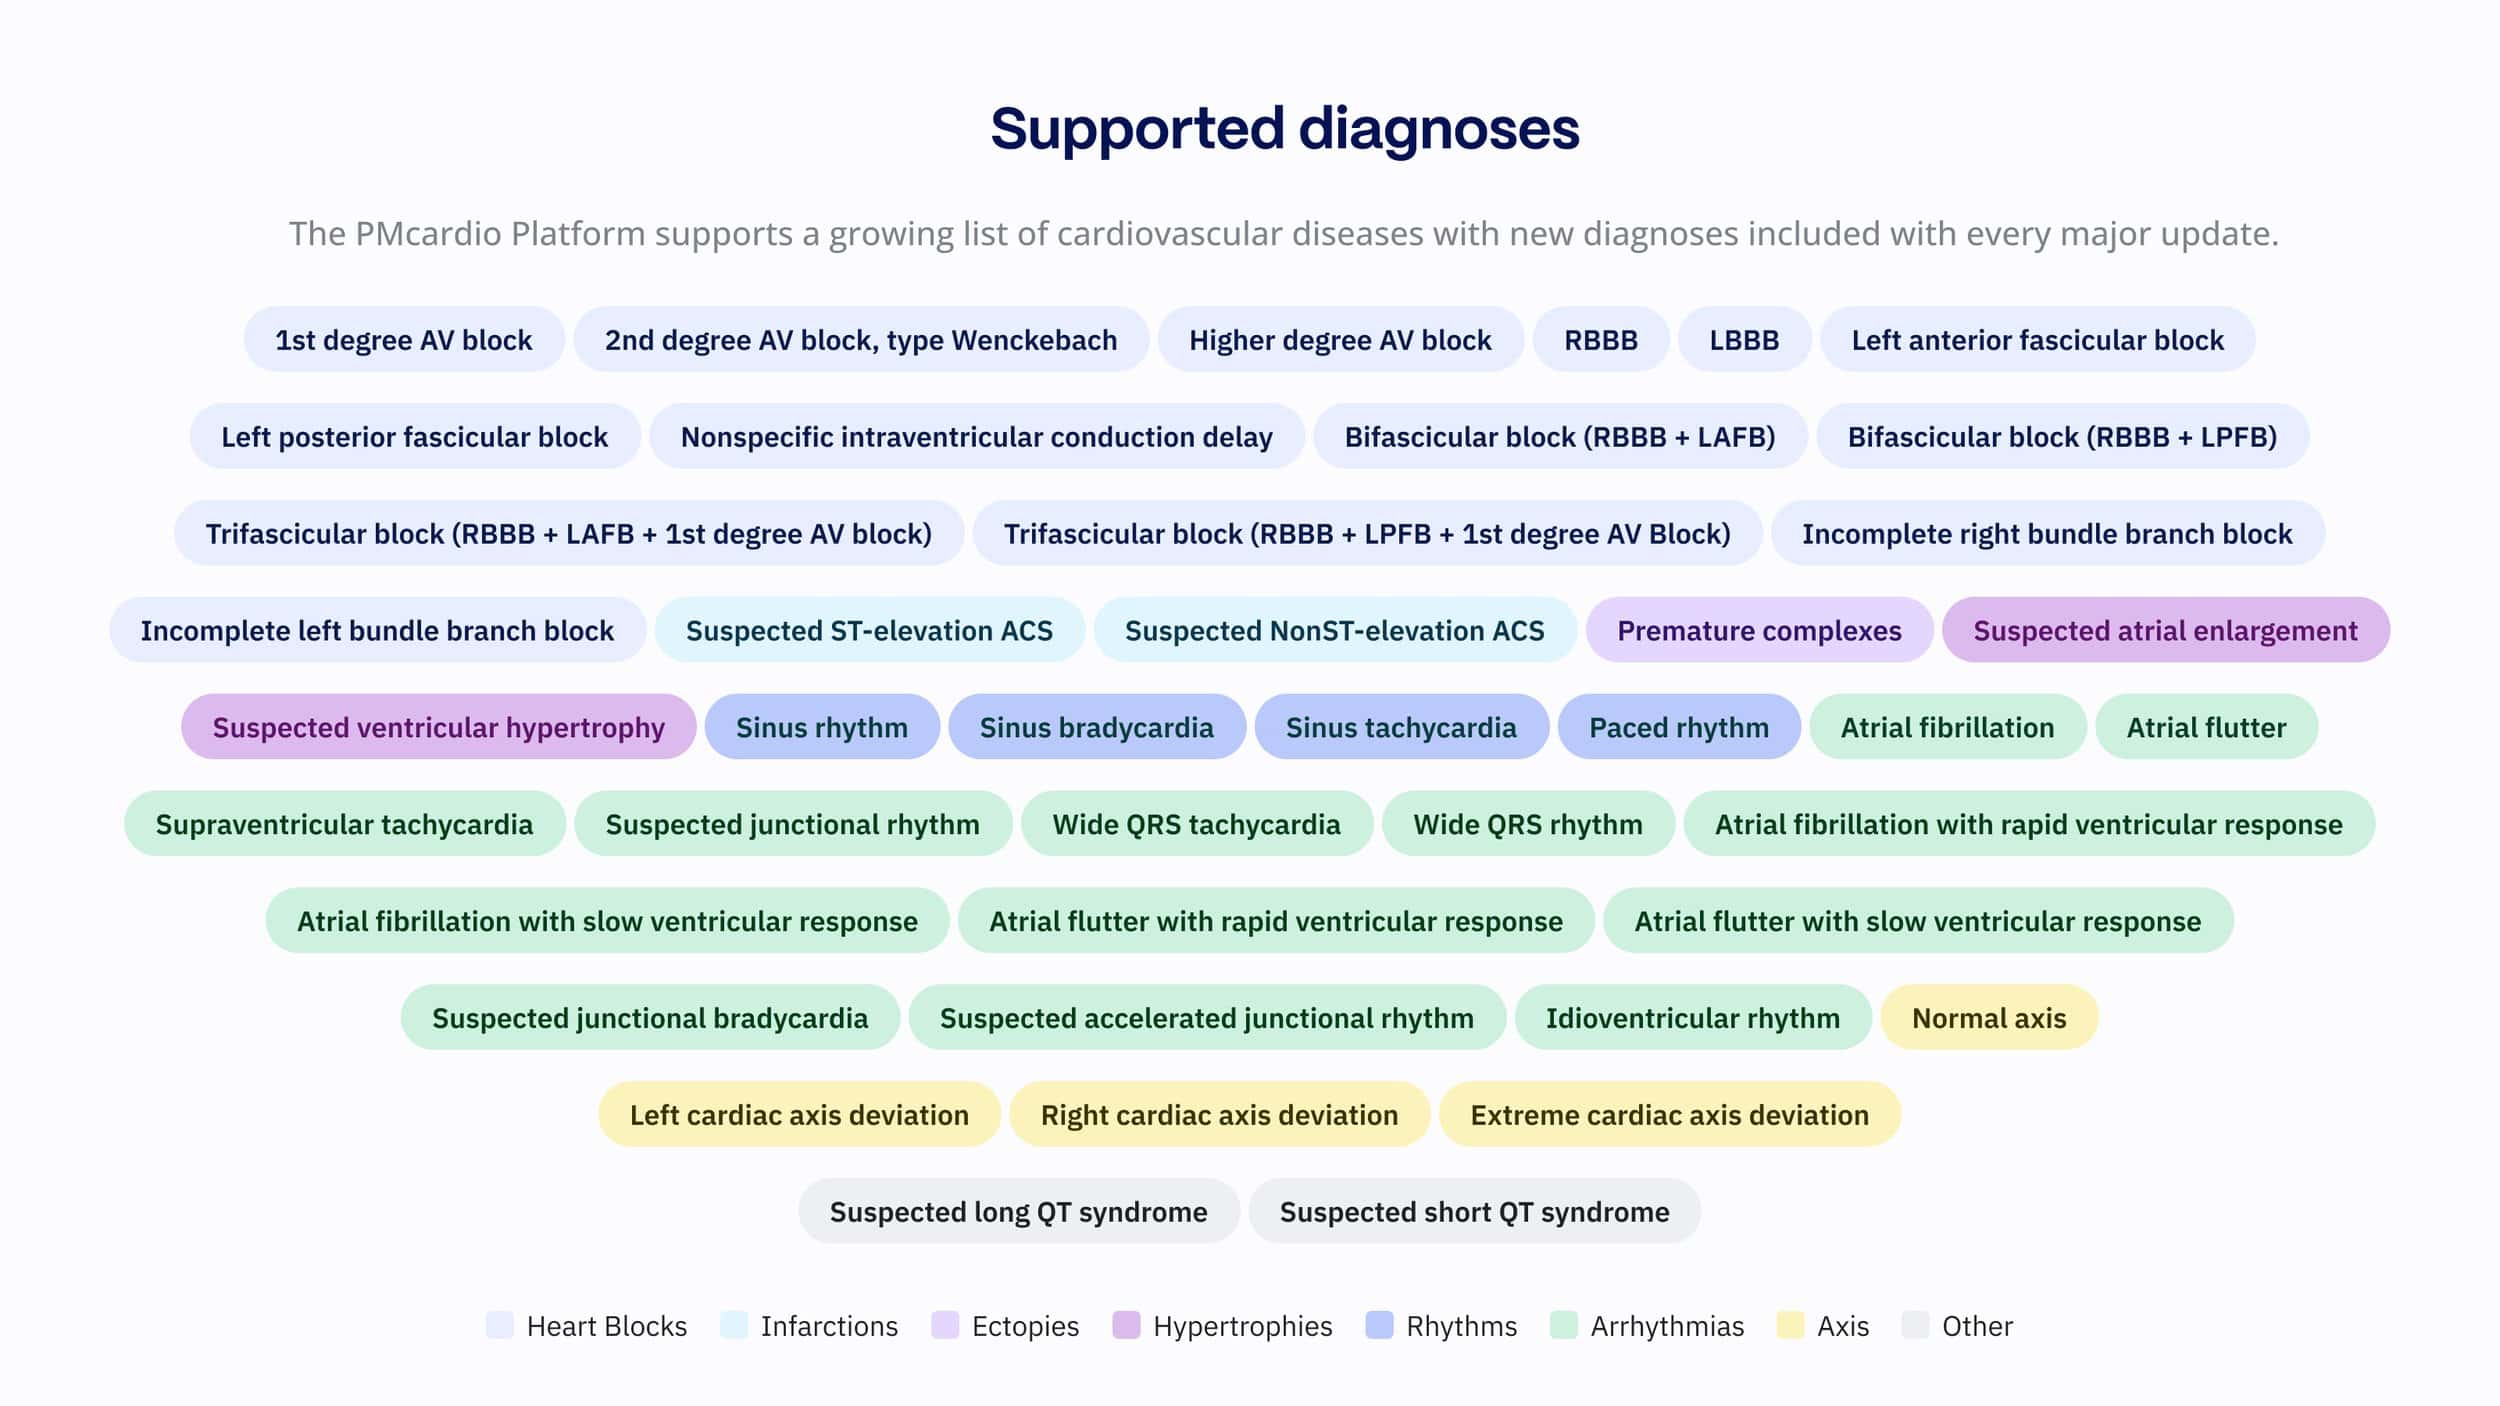 A list of cardiovascular diagnoses supported by PMcardio